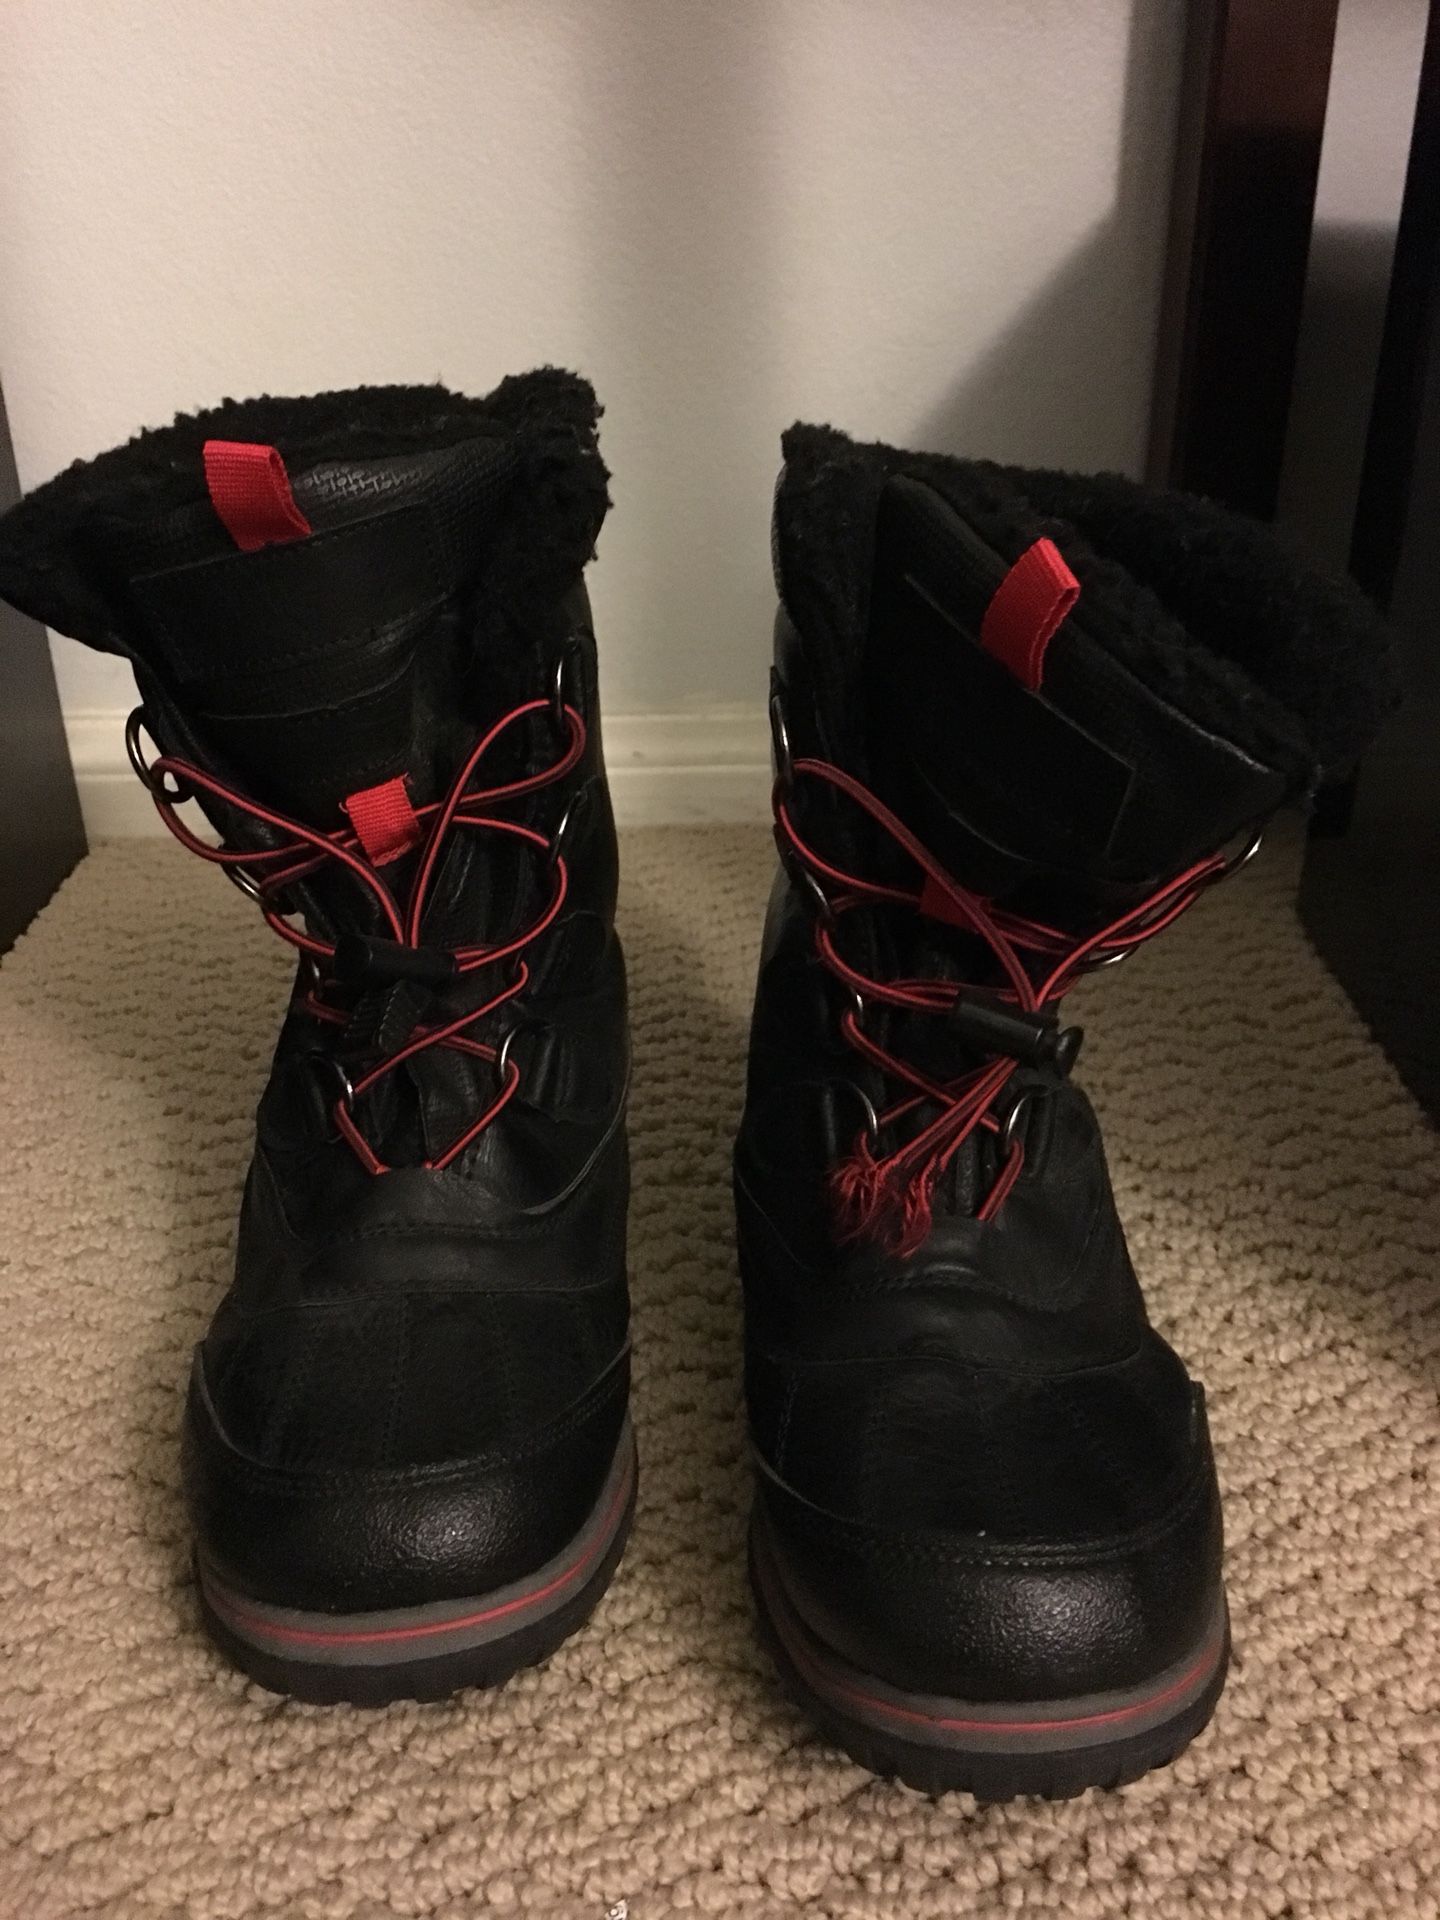 Kids snow boots, size 7 in boys